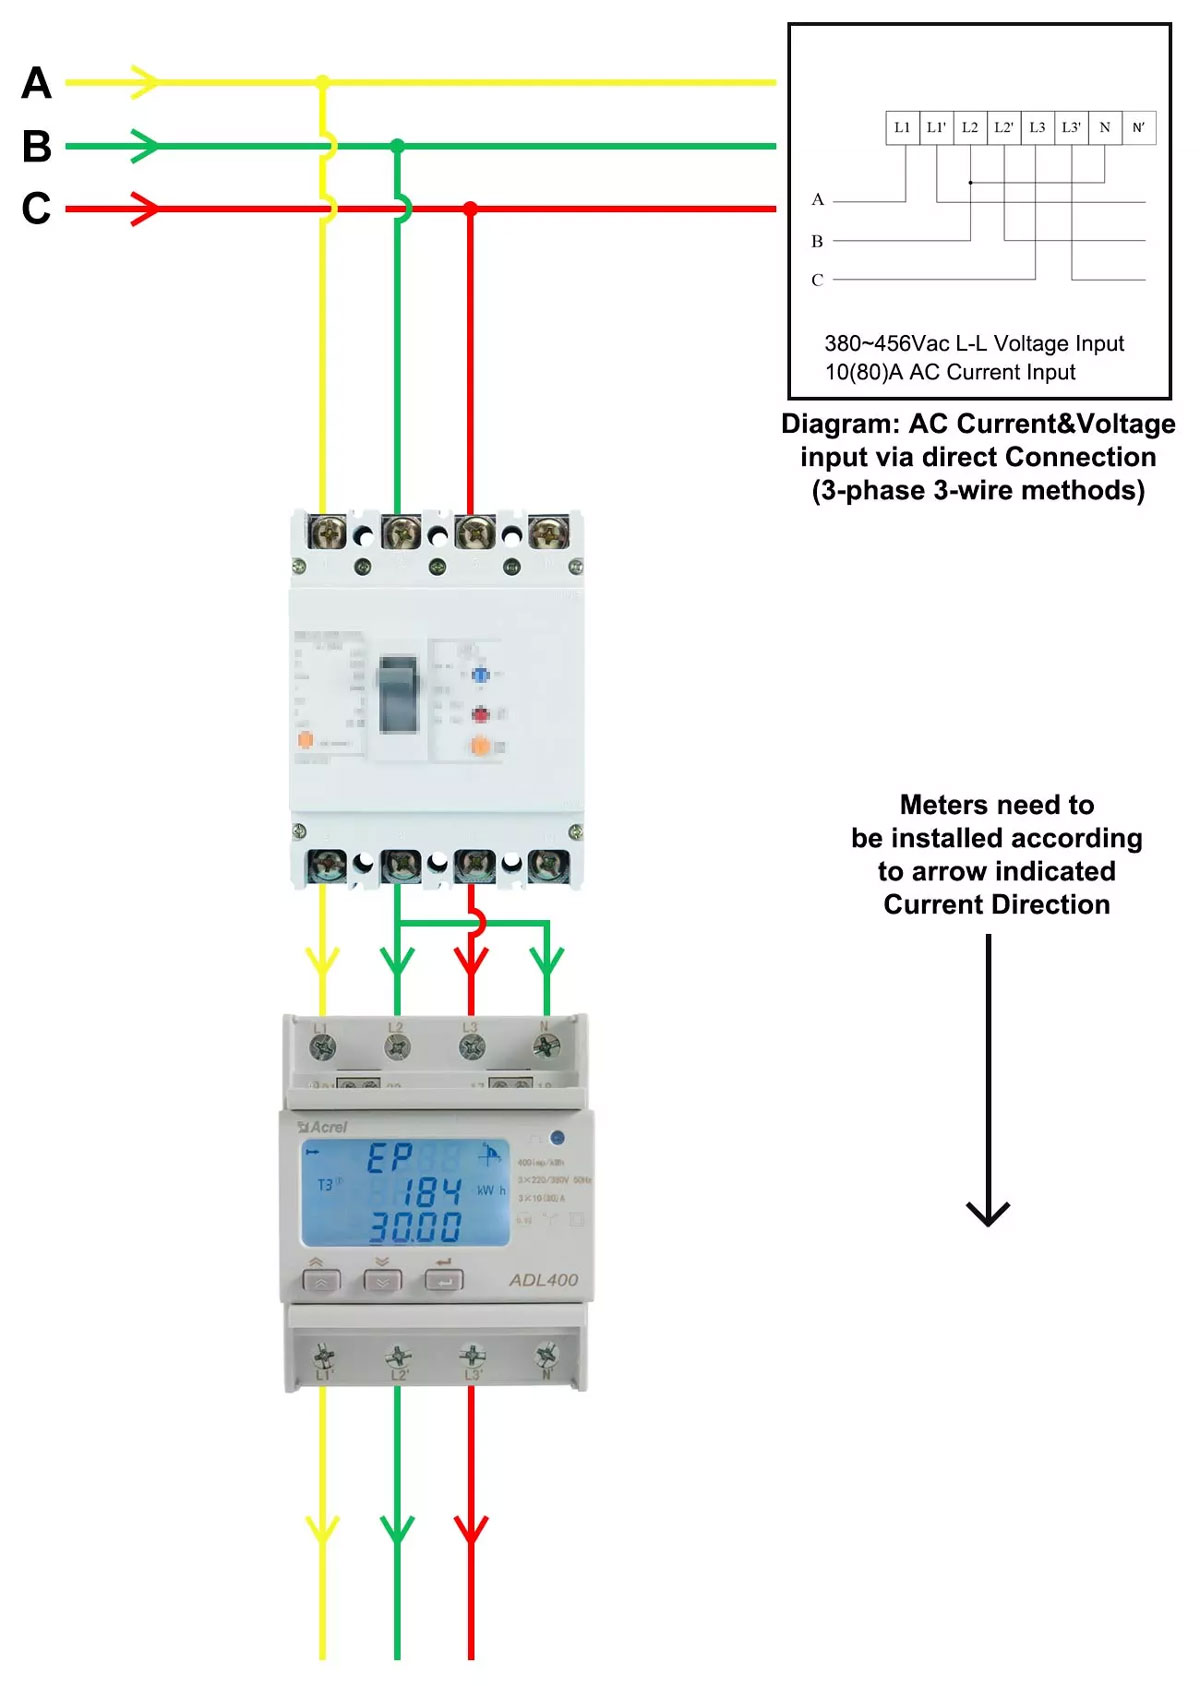 Power-Wiring-3-phase-3-wire-via-direct-connect.jpg